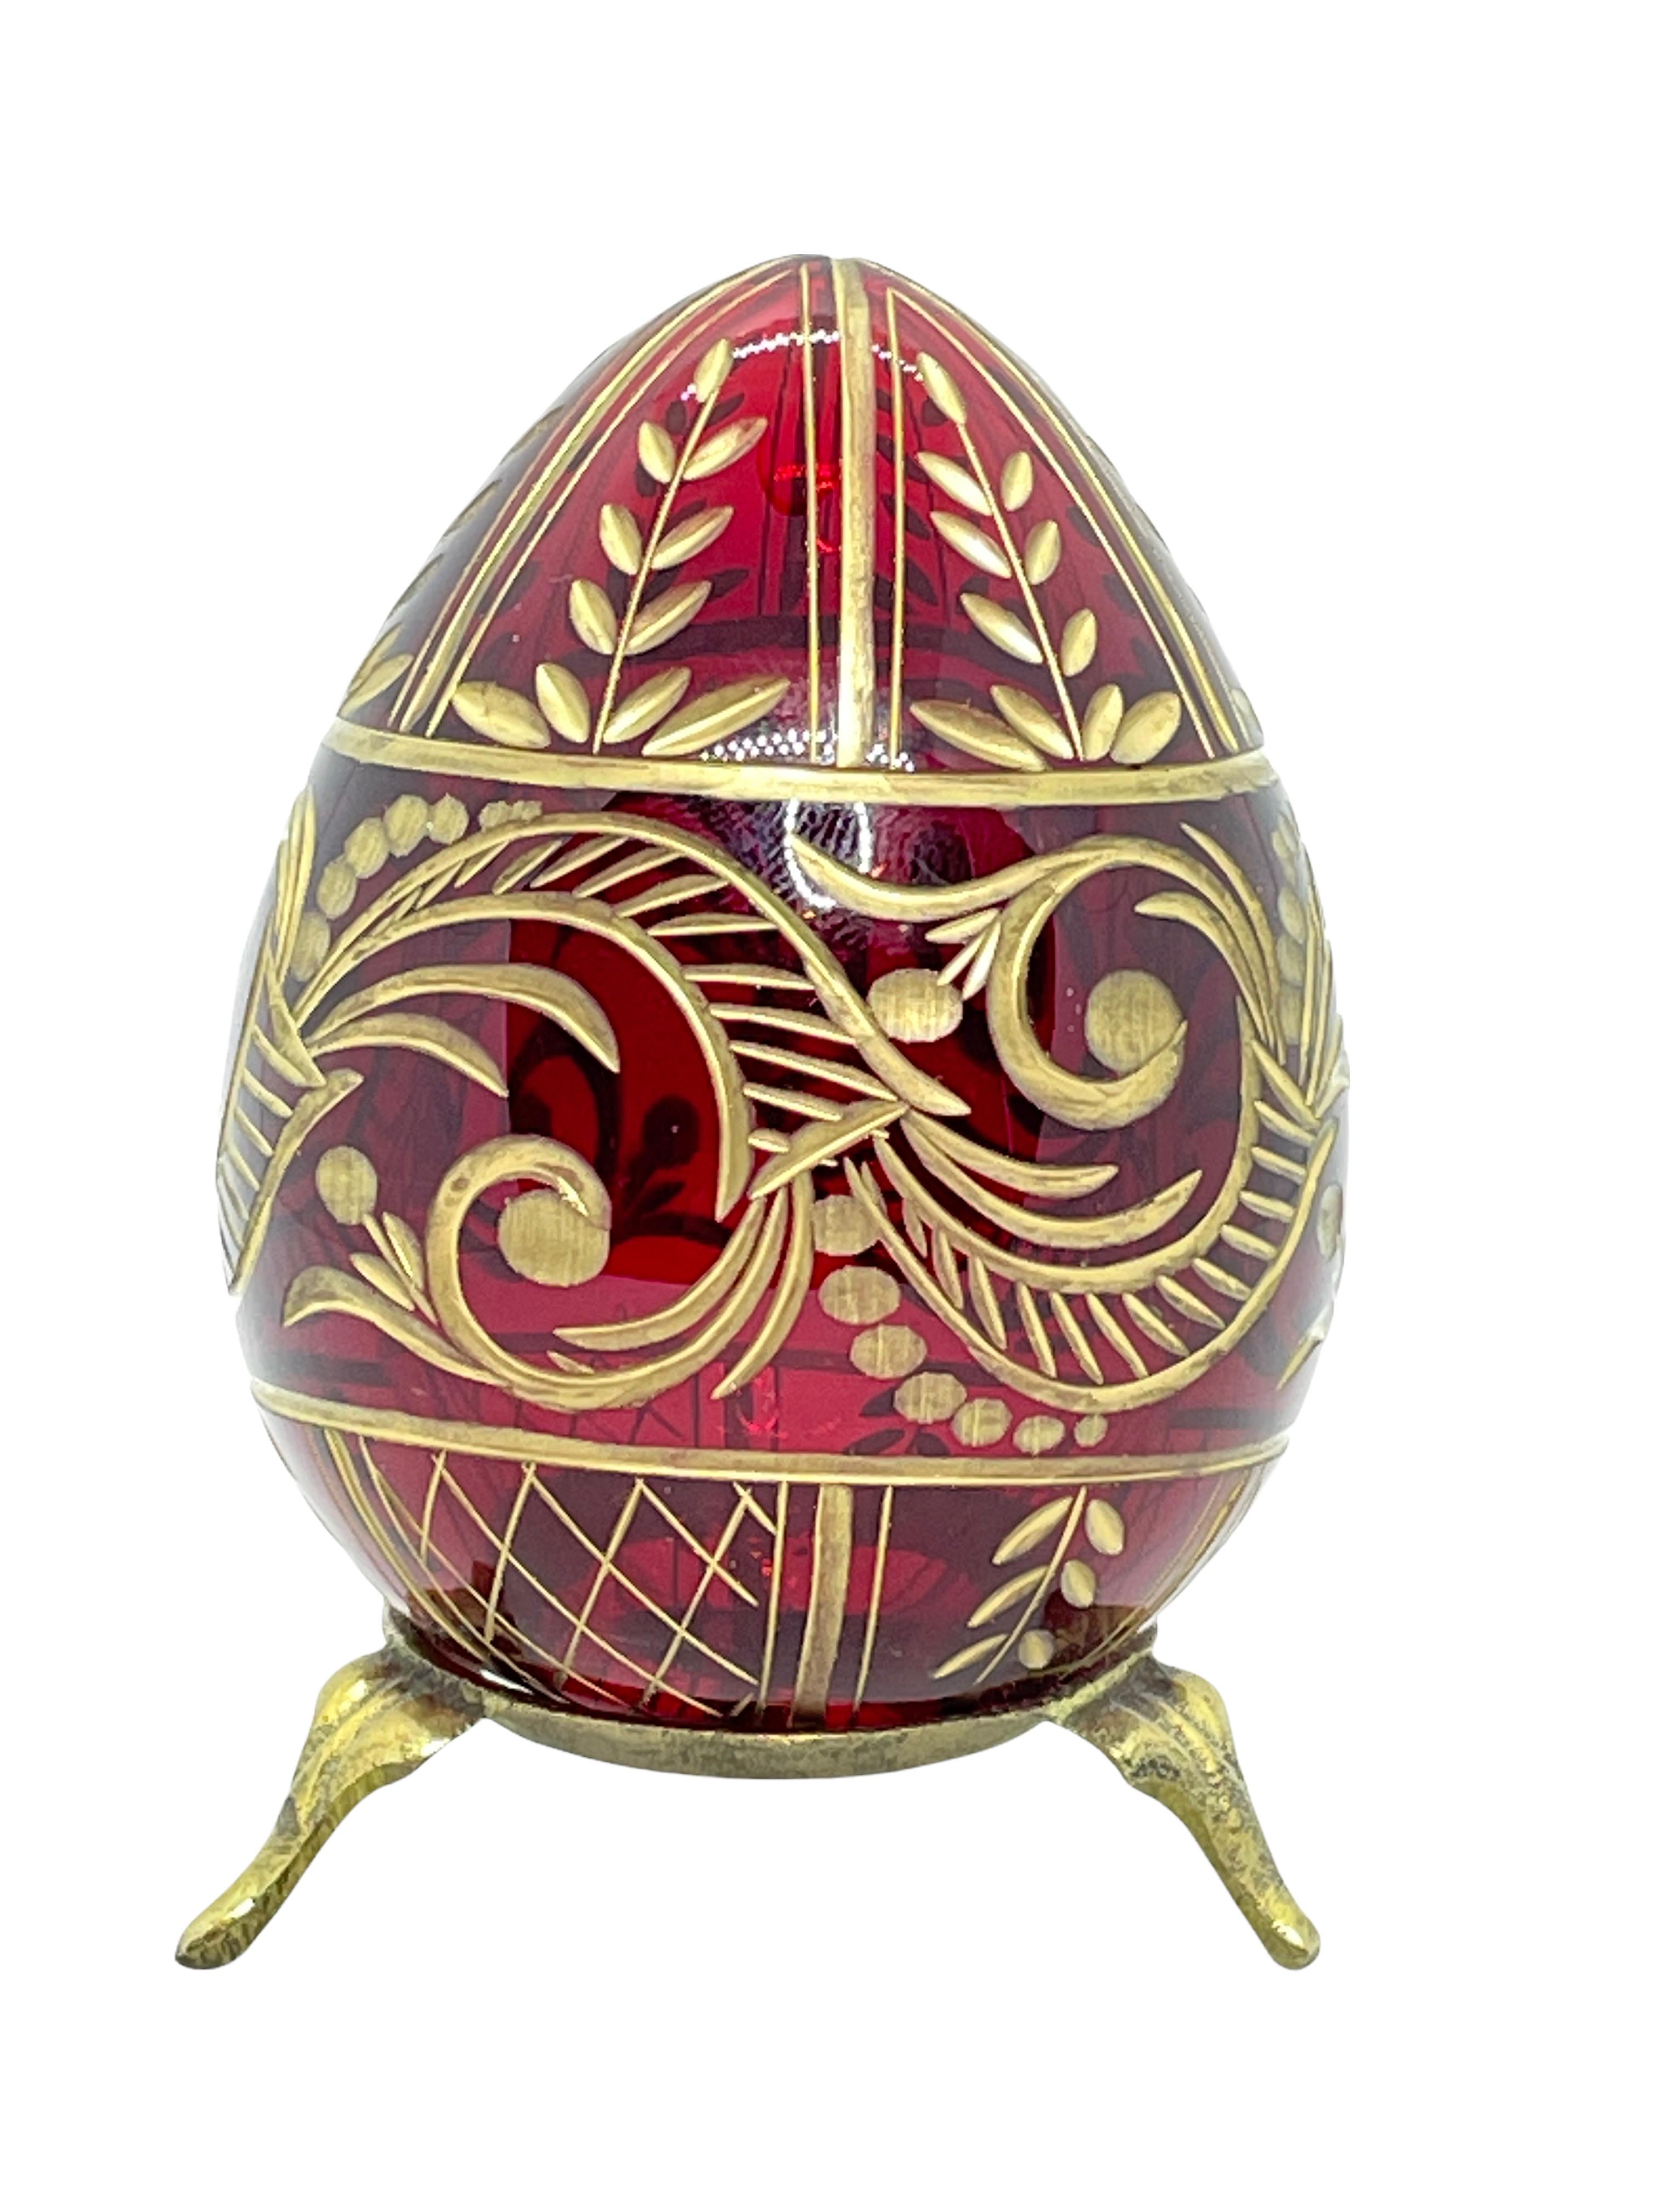 decorated eggs faberge style